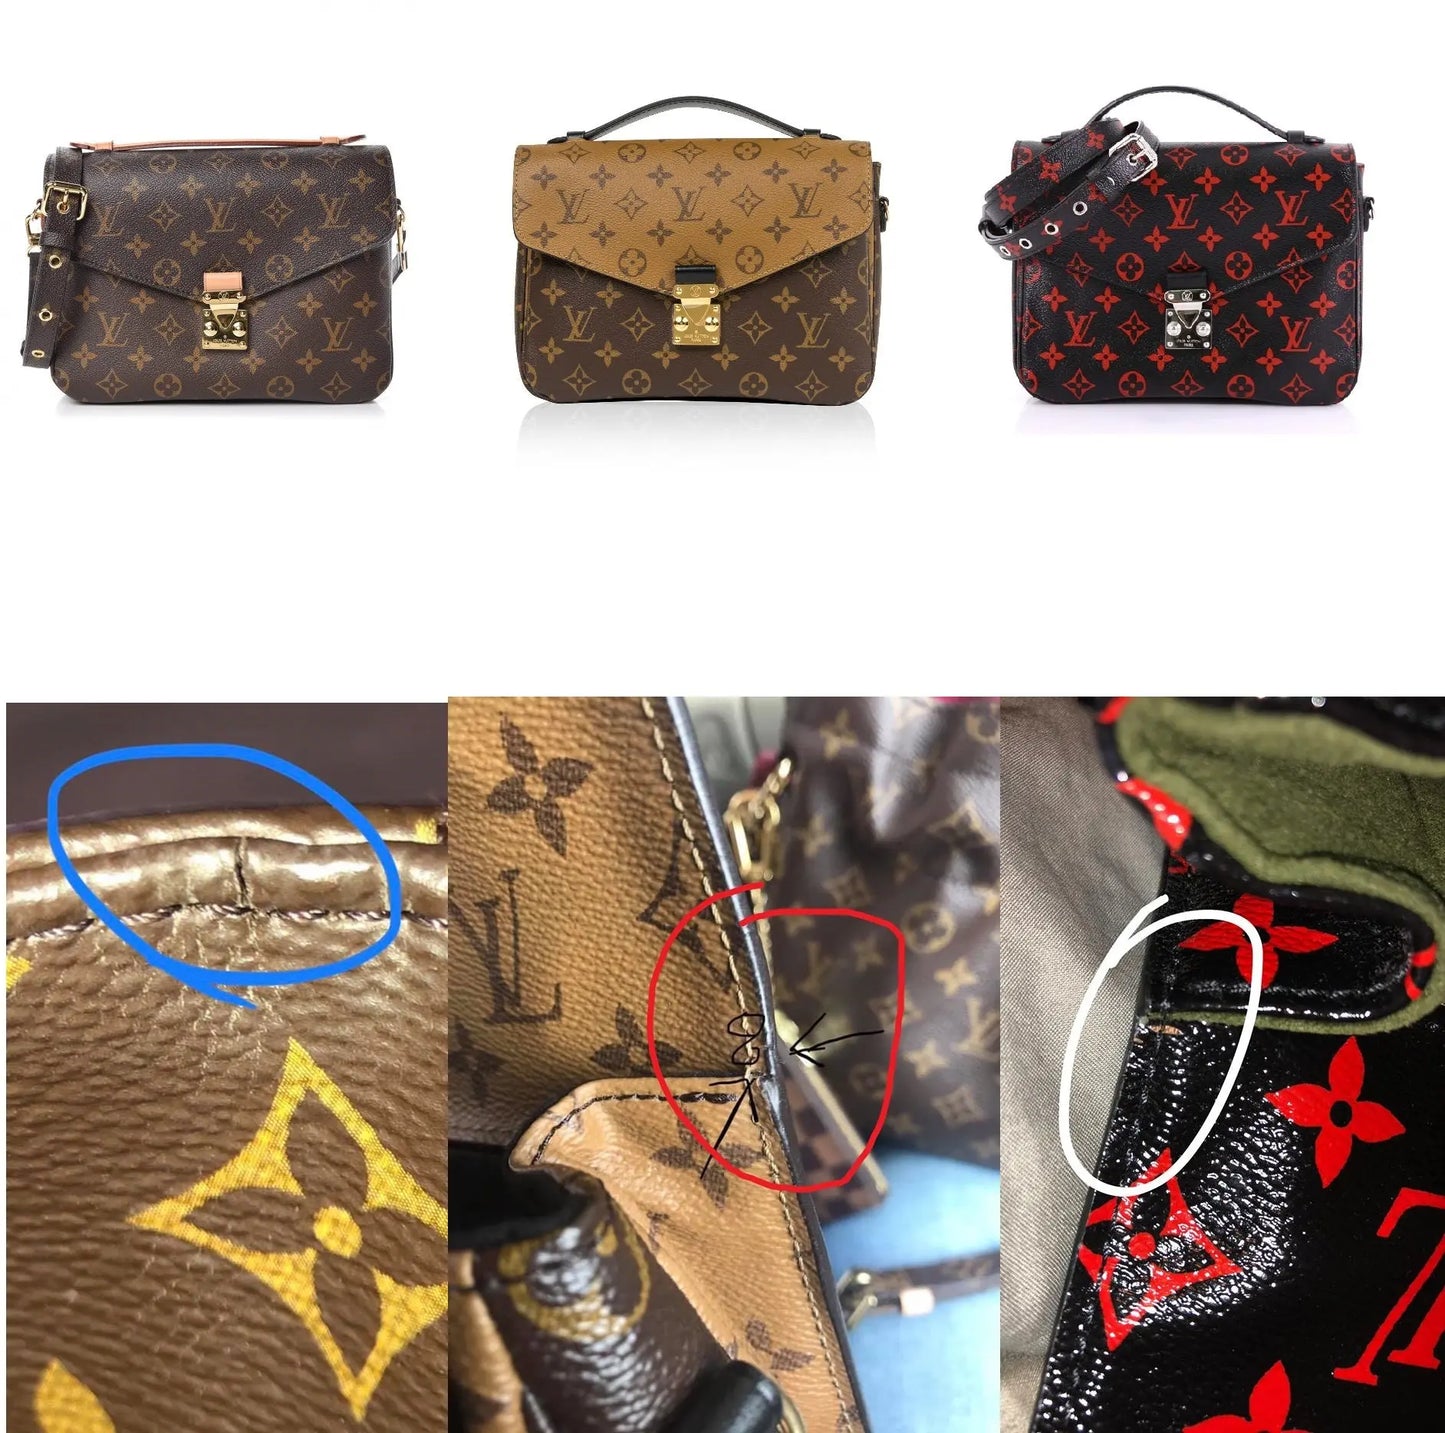 5 Reasons why YOU should NOT buy the Louis Vuitton Pochette Metis